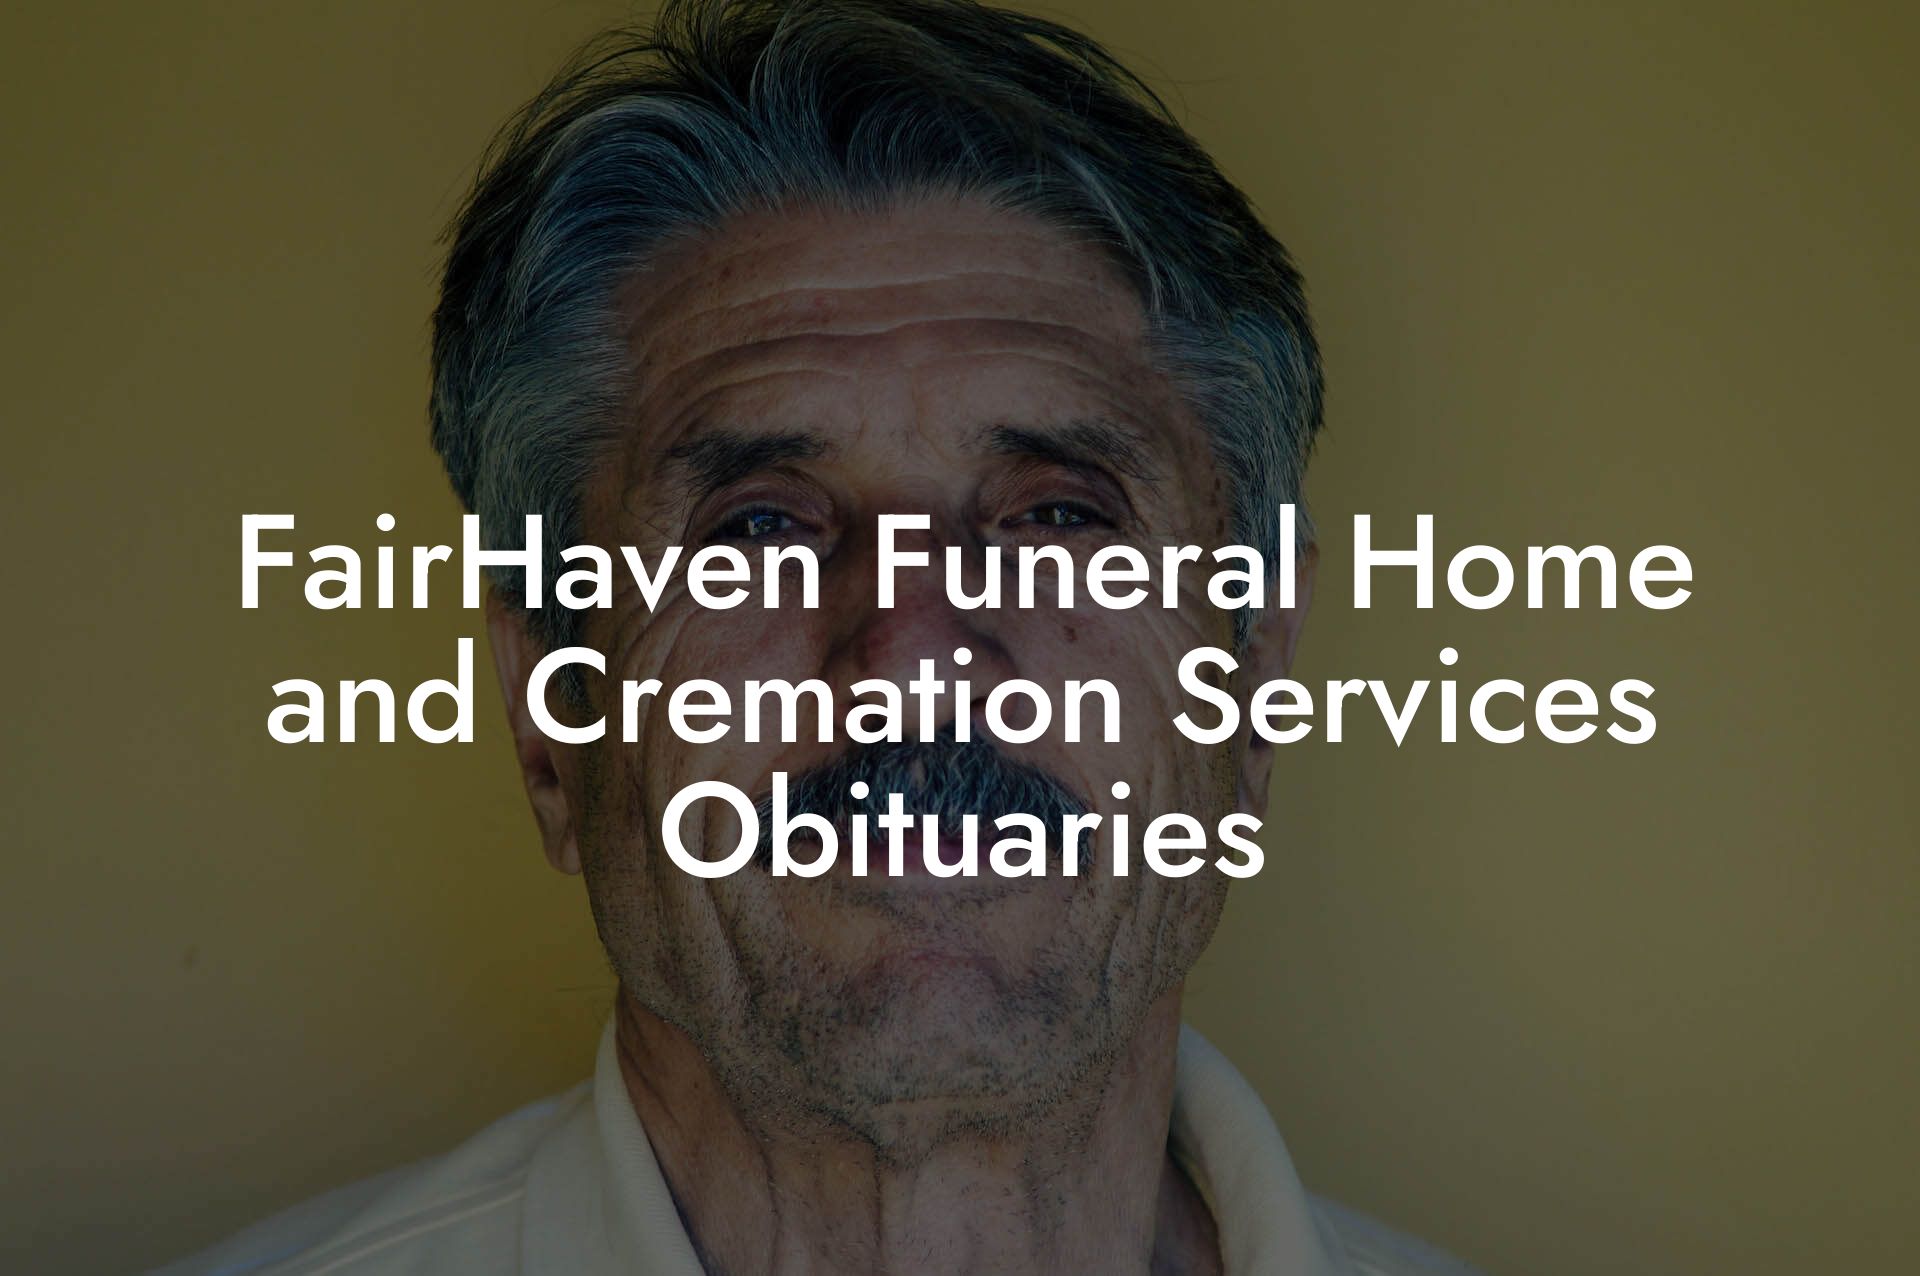 FairHaven Funeral Home and Cremation Services Obituaries